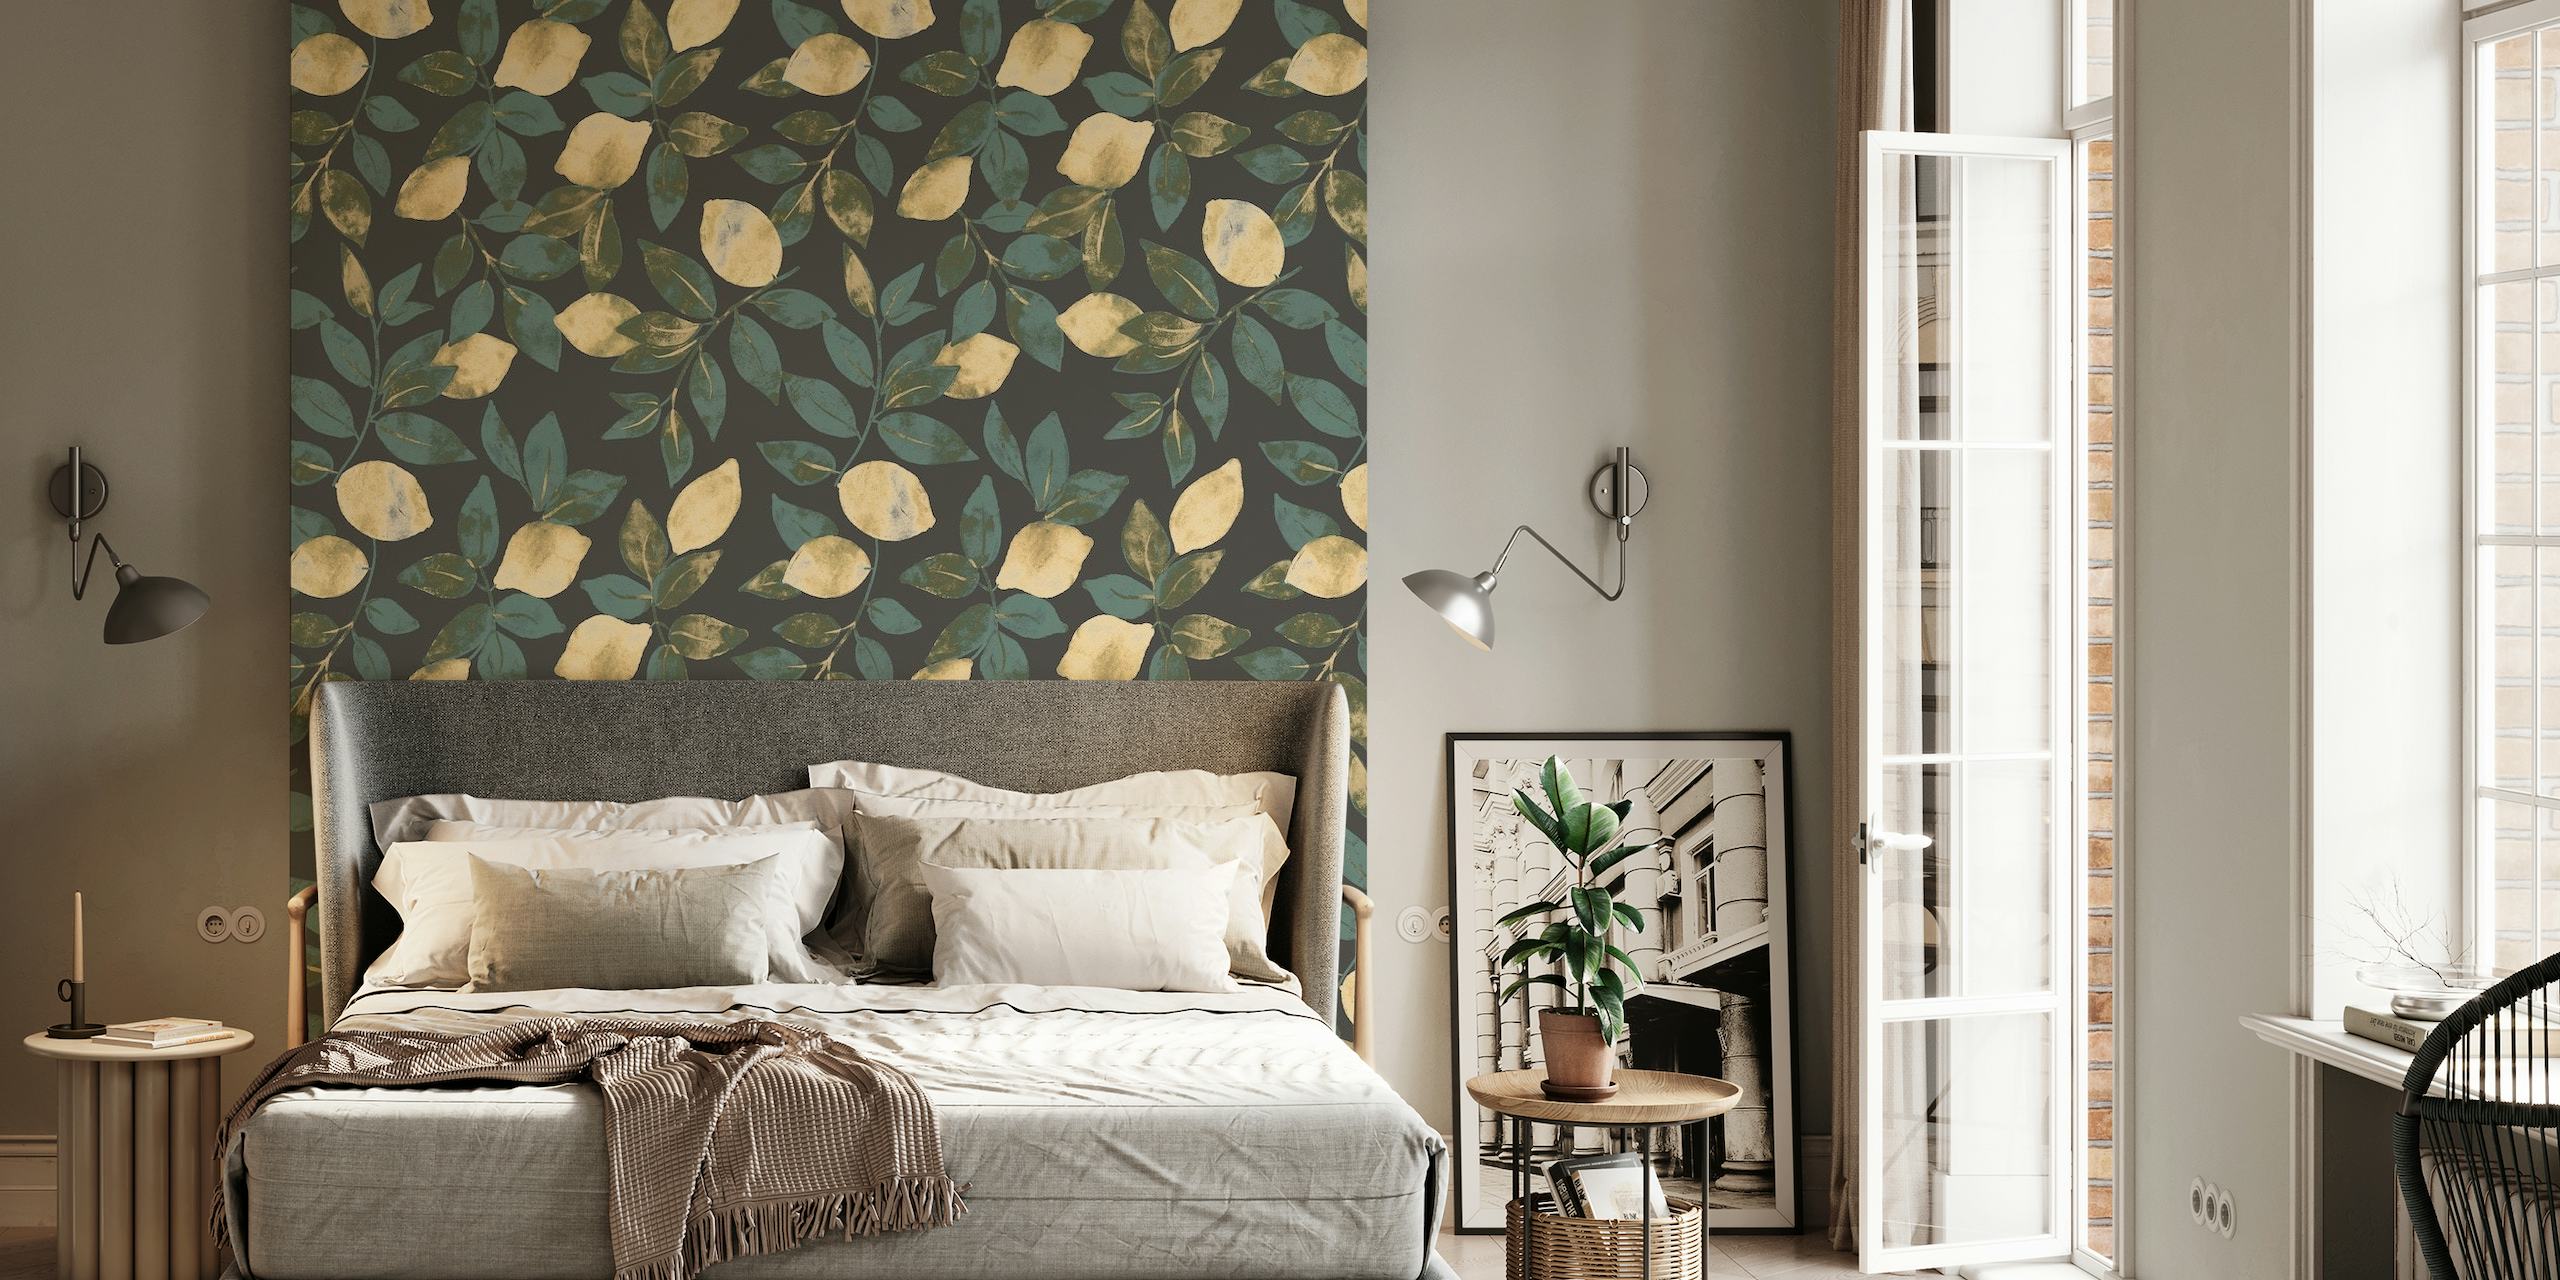 Vintage Lemons wall mural with lush green leaves and sliced citrus fruit